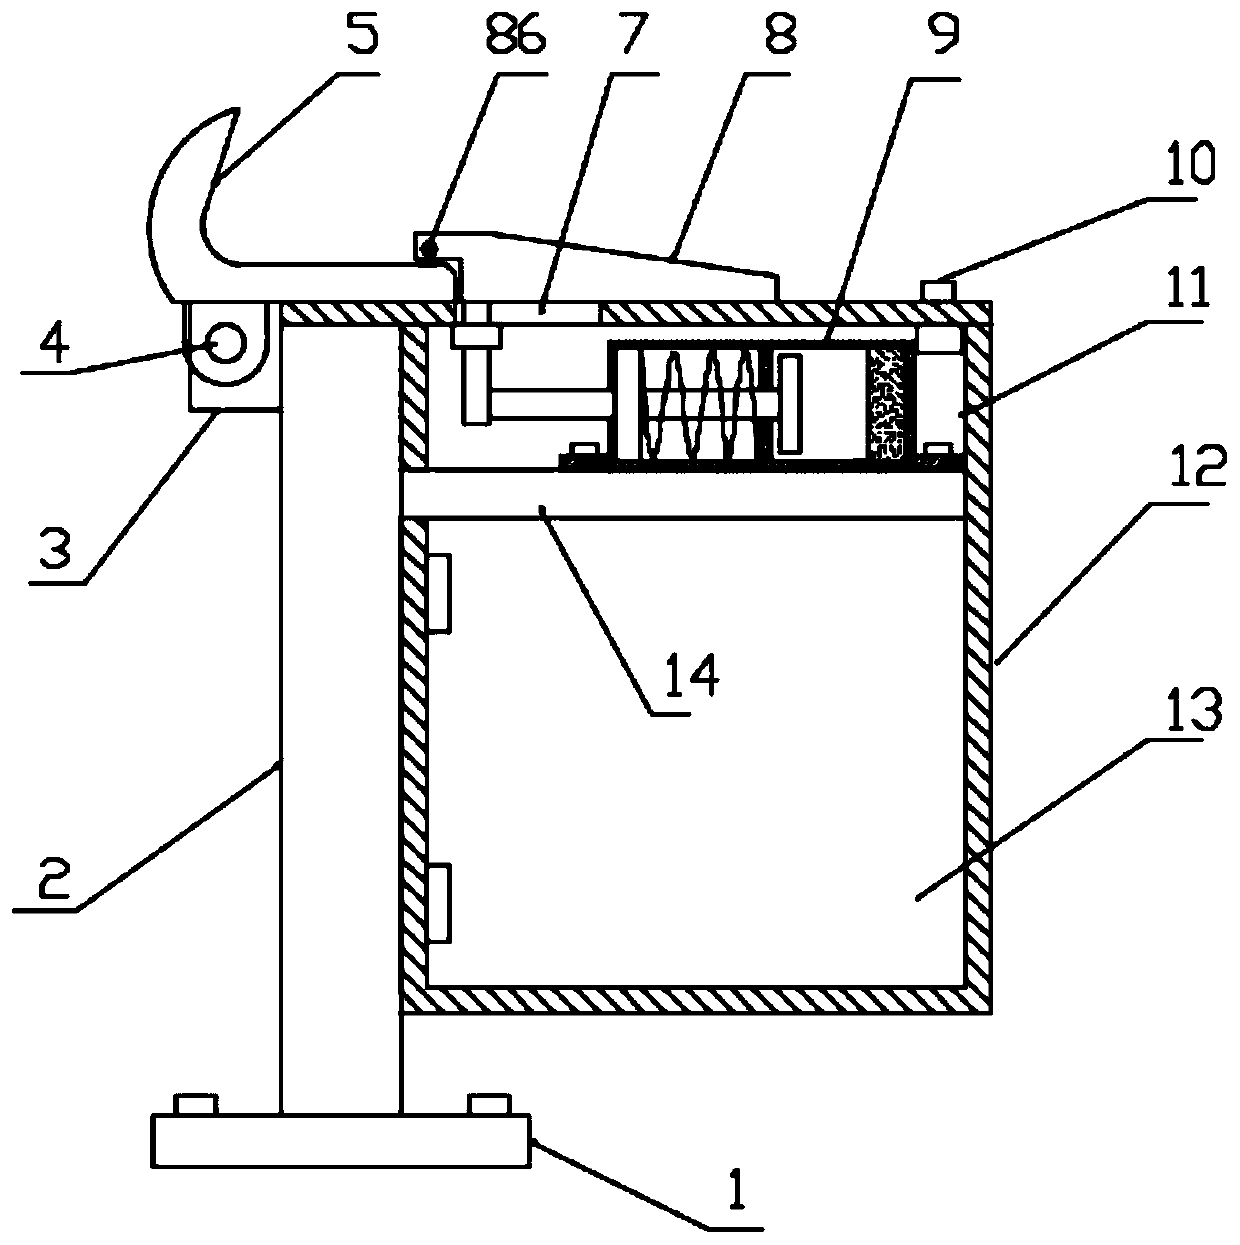 Emergent cable release control device for ship